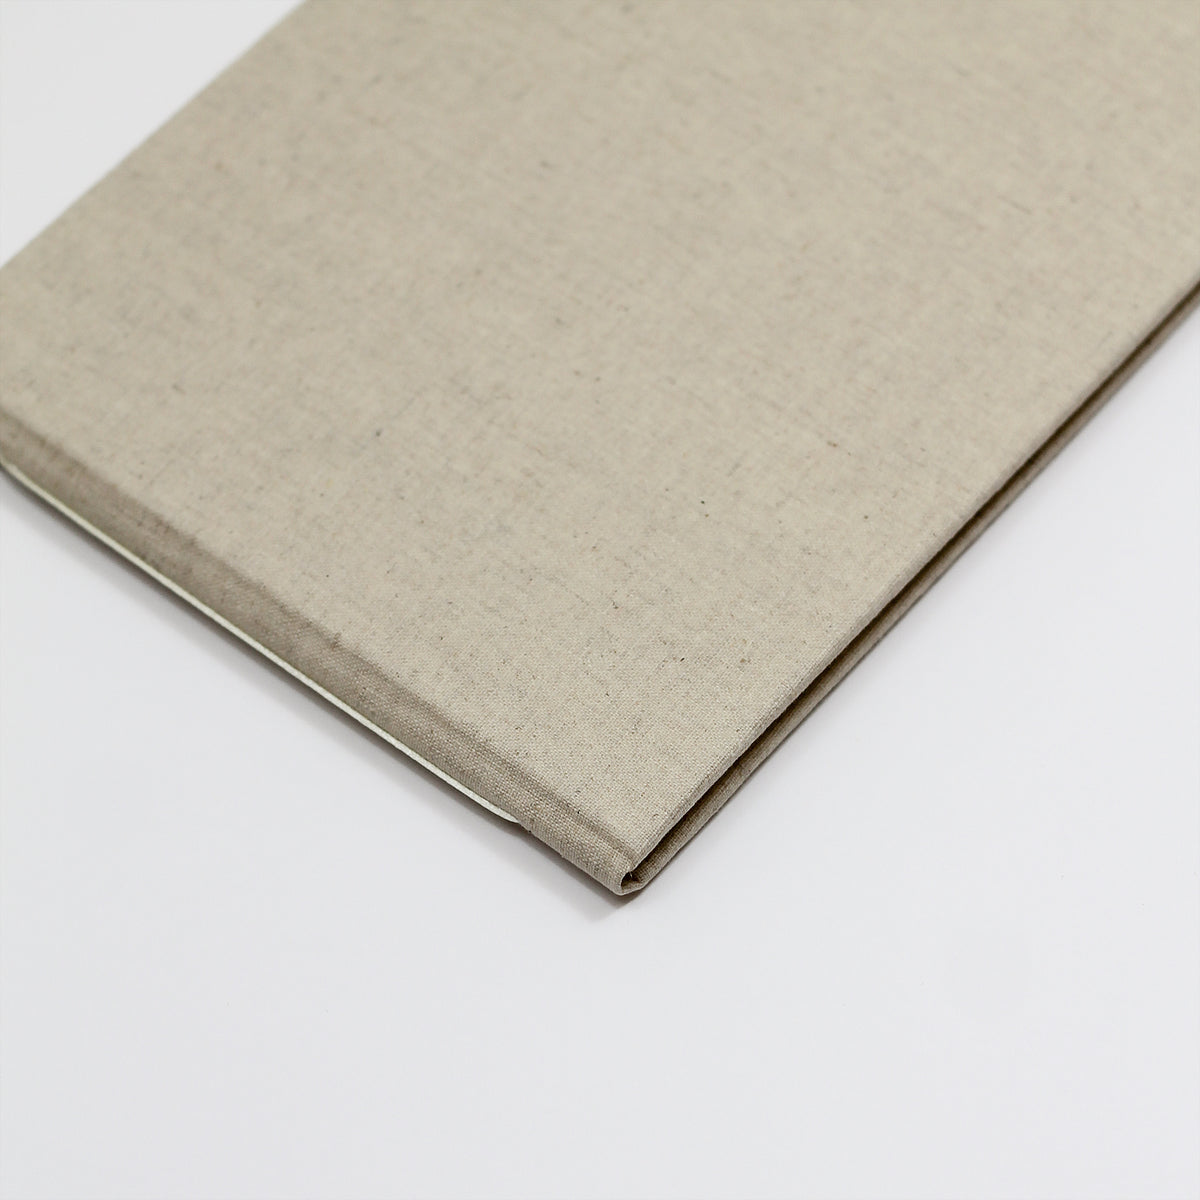 Guestbook | Cover: Natural Linen | Available Personalized